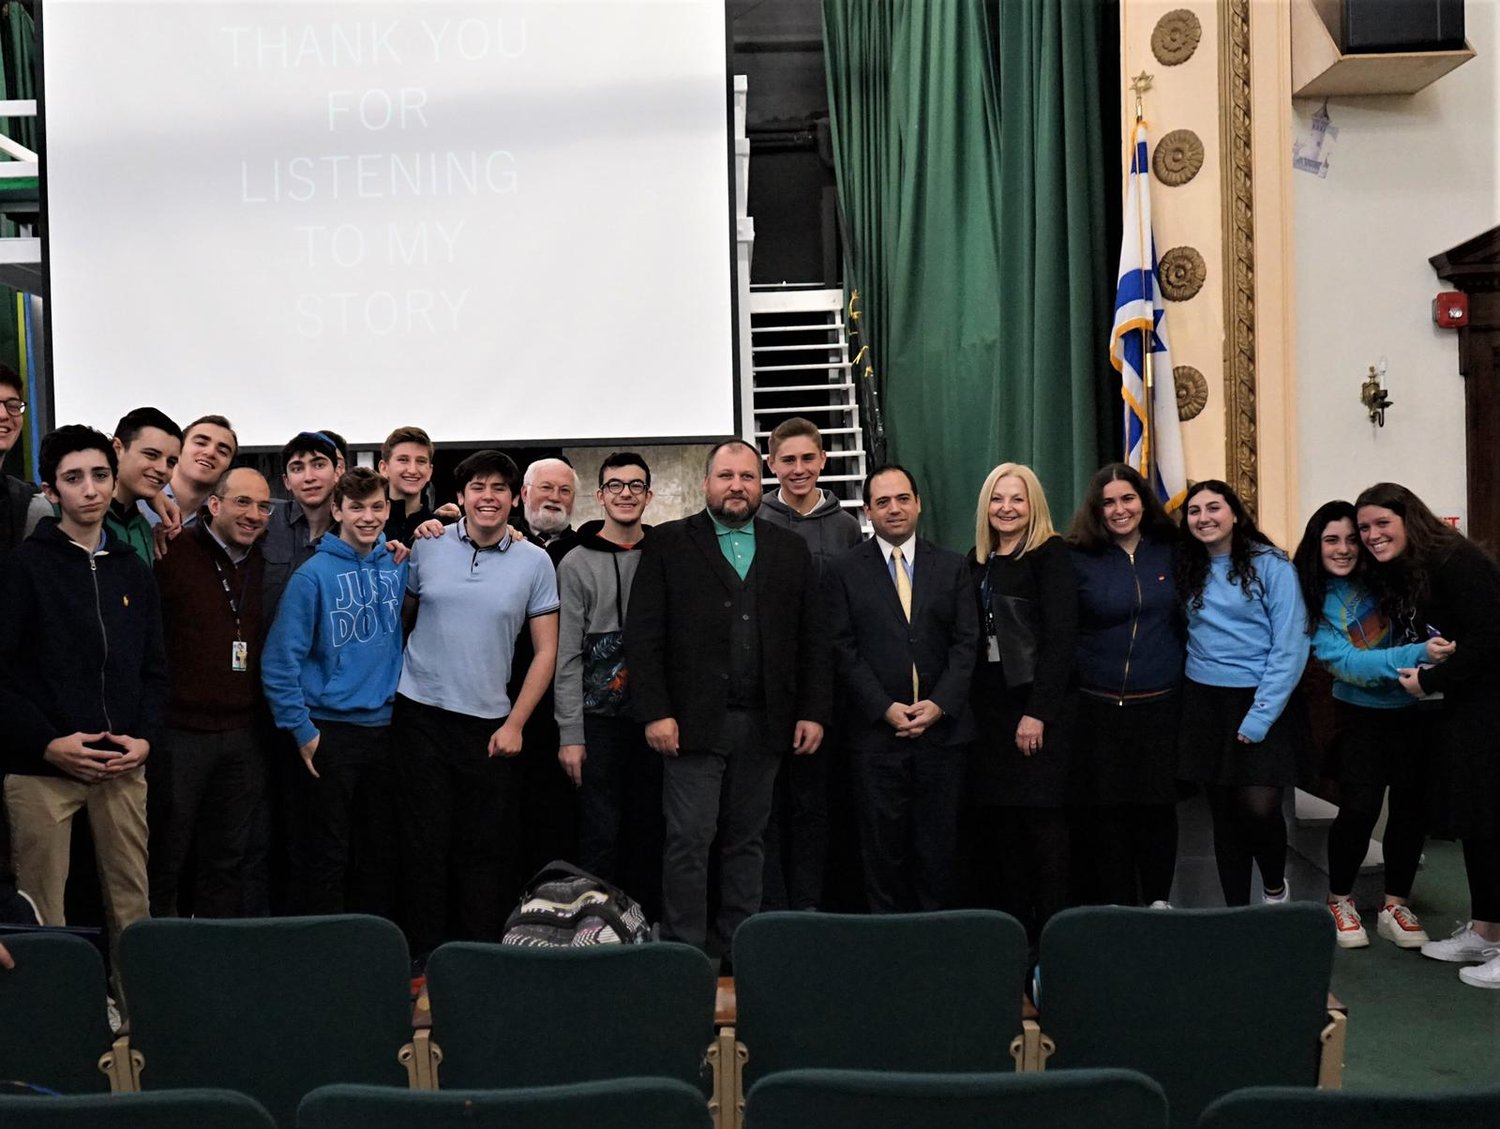 Former white supremacist and Ku Klux Klan member TM Garrett, center, spoke at HAFTR High School about his conversion and subsequent aversion to hate.